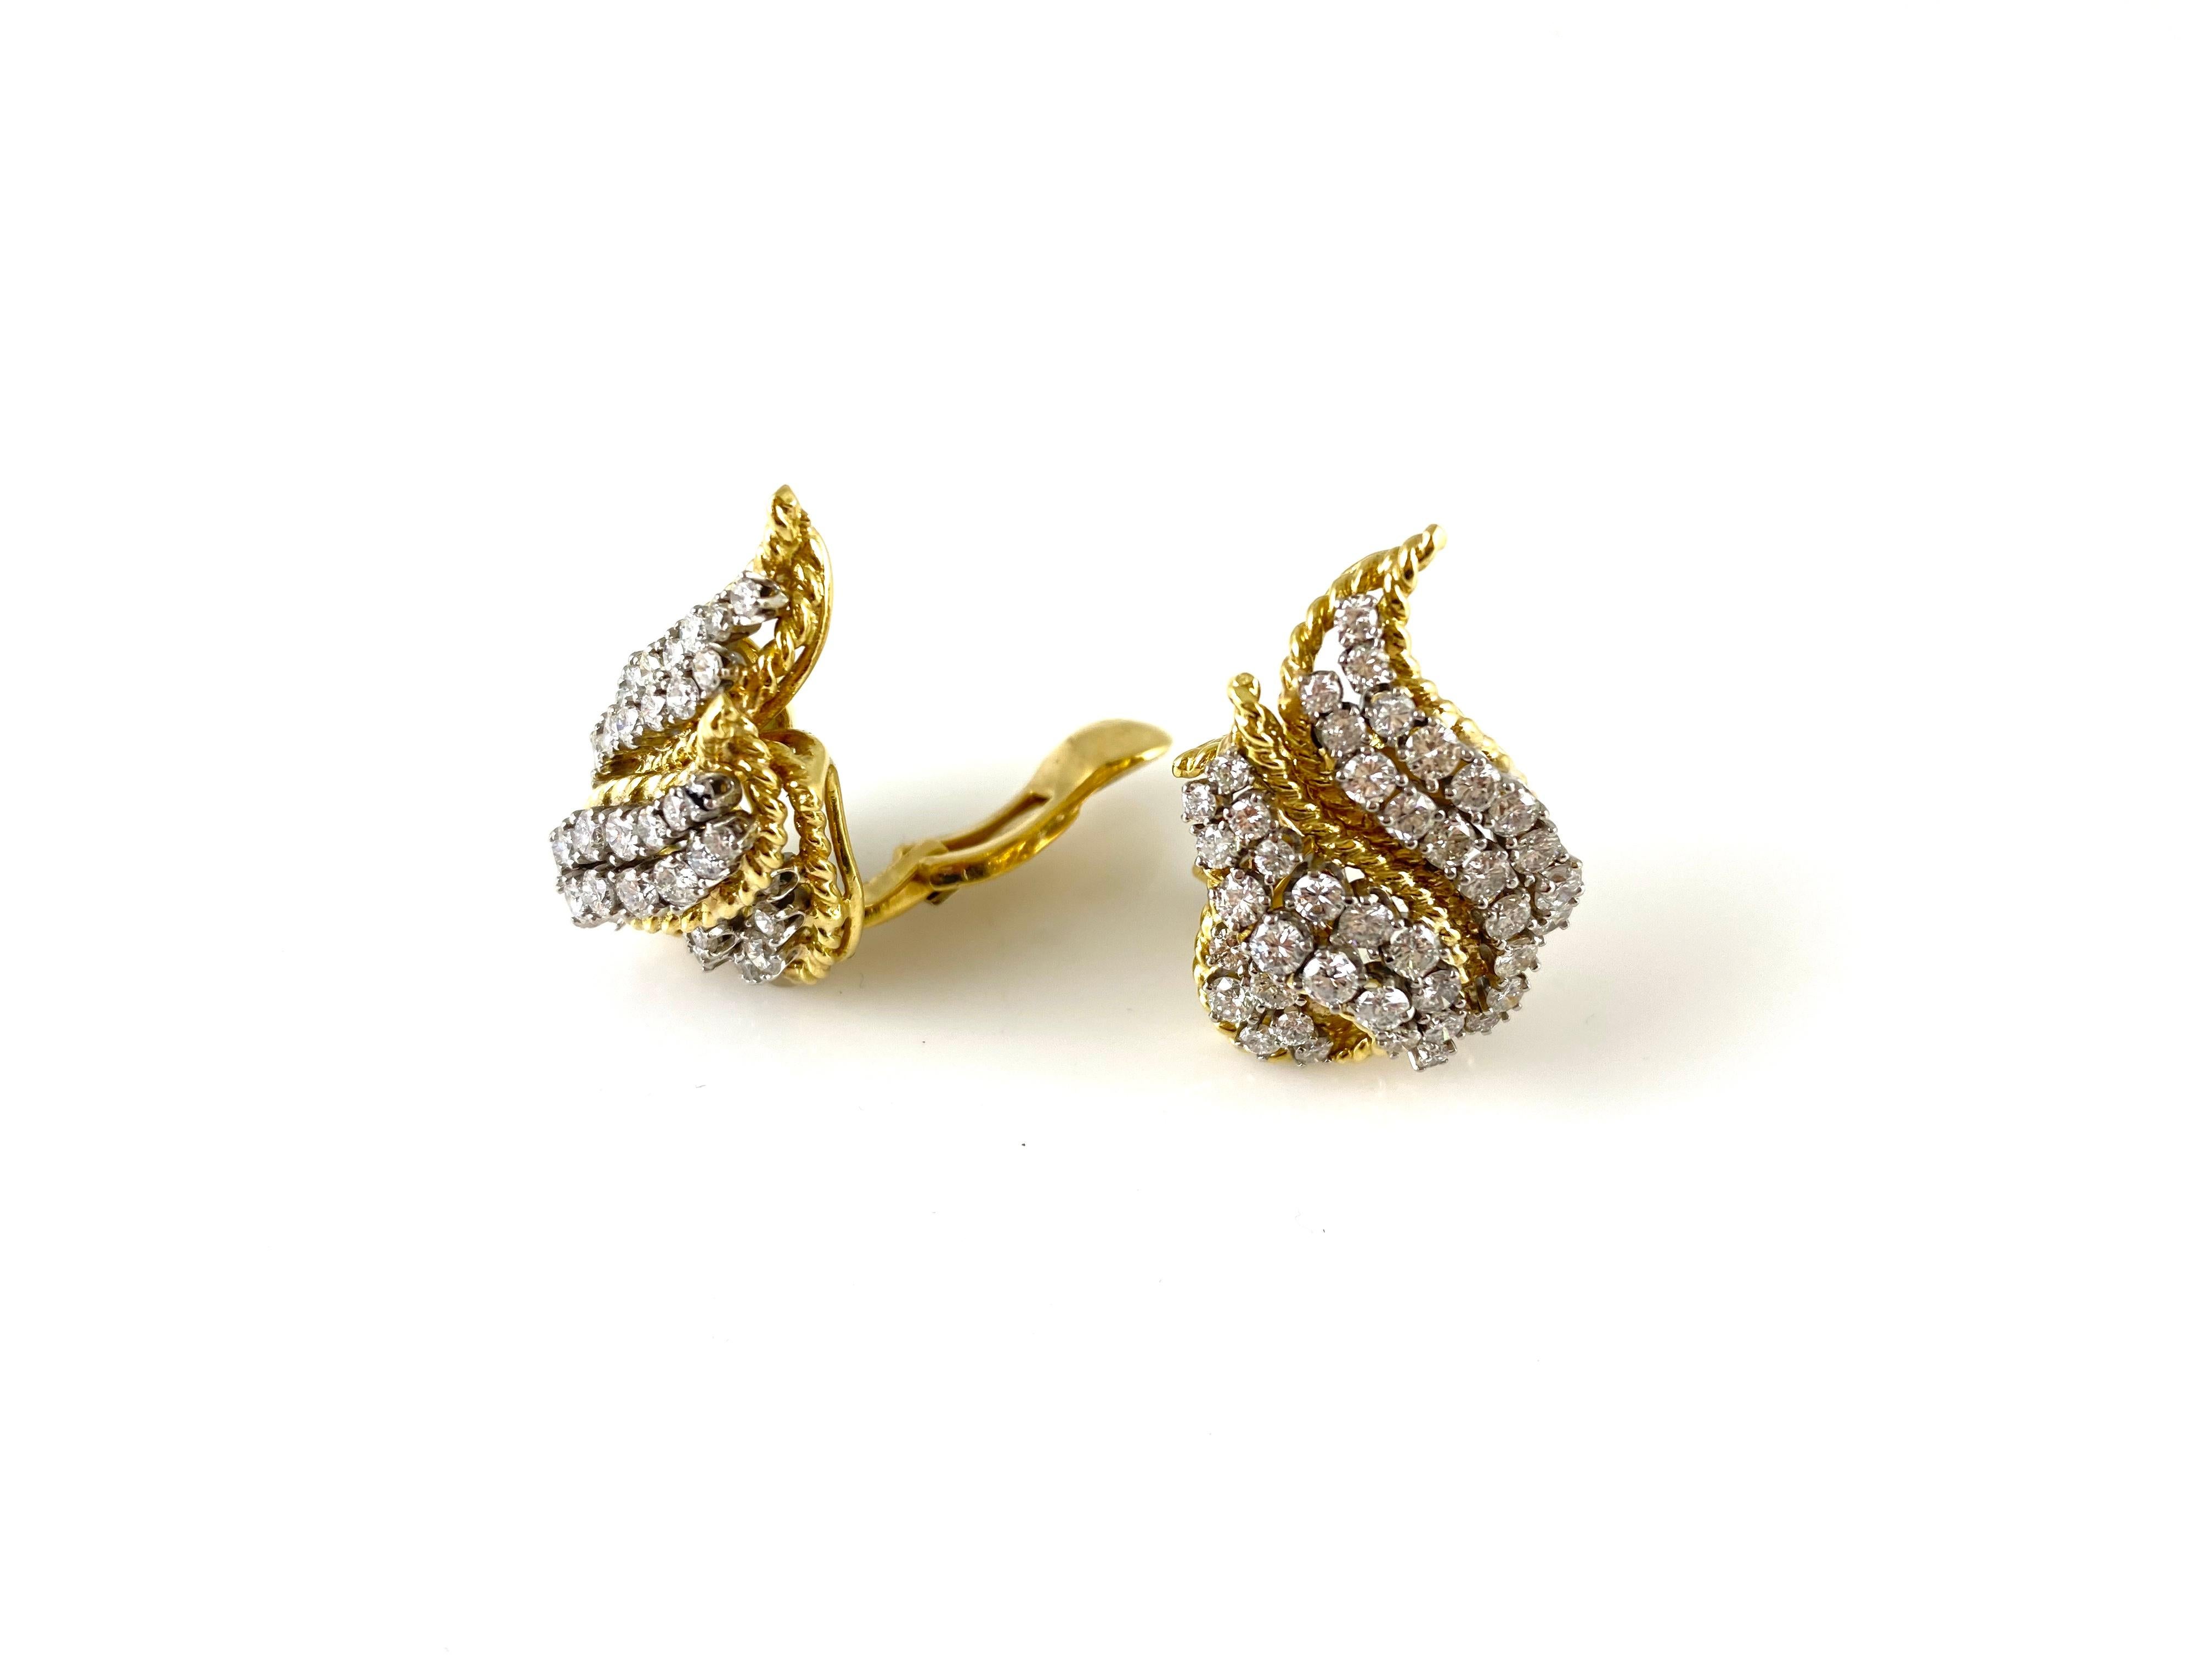 The earrings are finely crafted in 18k yellow gold with round diamonds weighing approximately total of 7.00 carat.
Circa 1960.